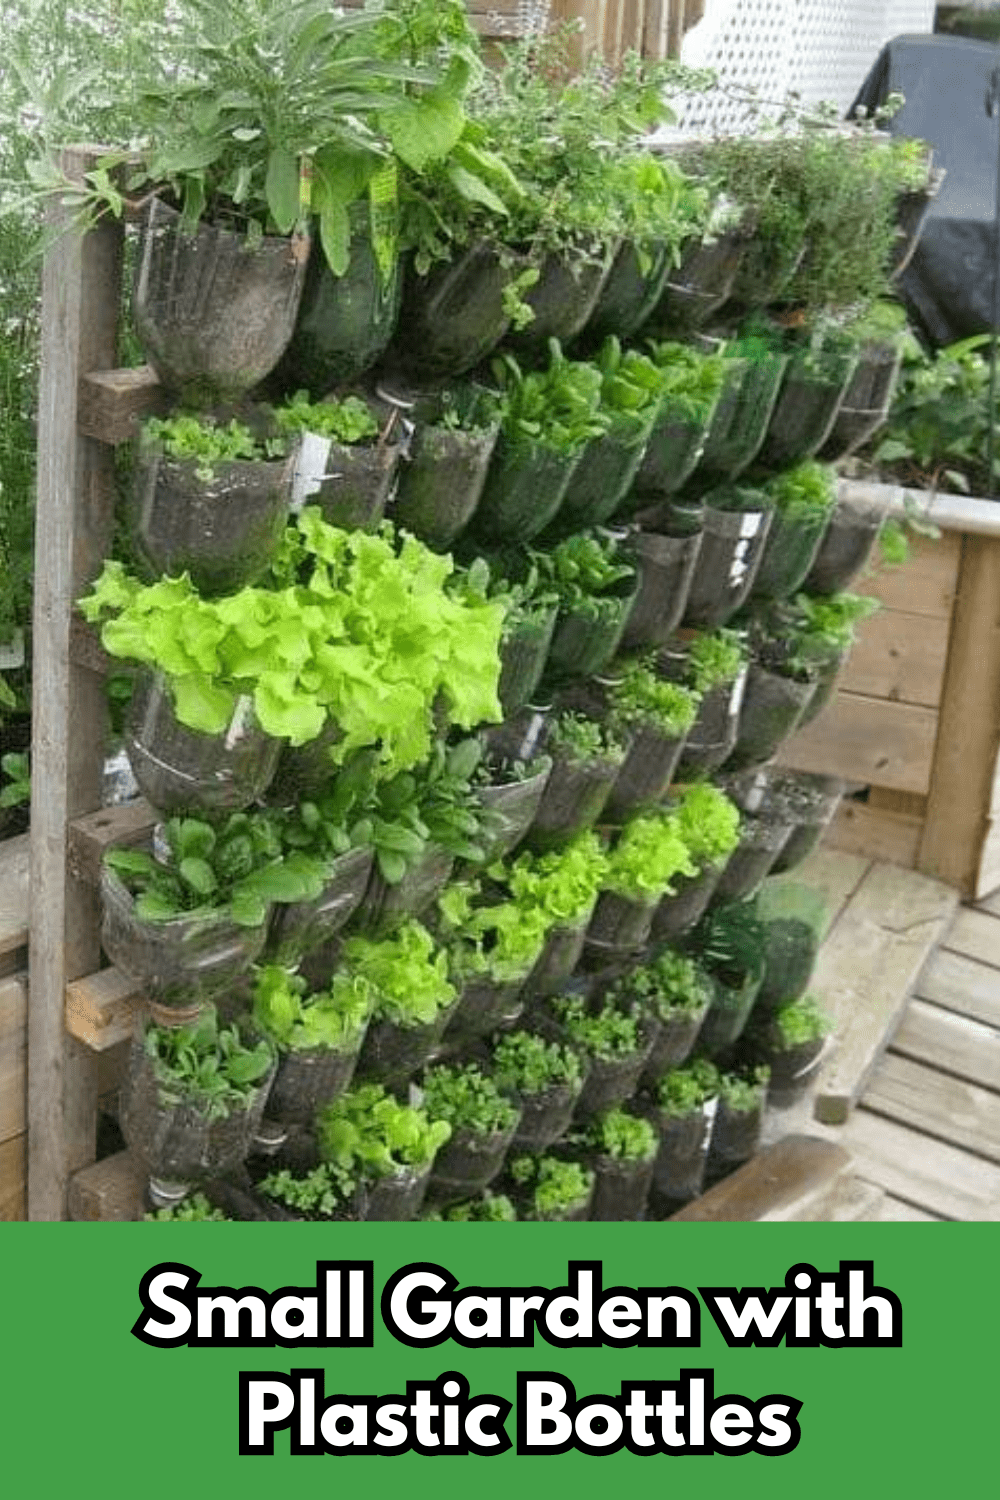 Small Garden with Plastic Bottles